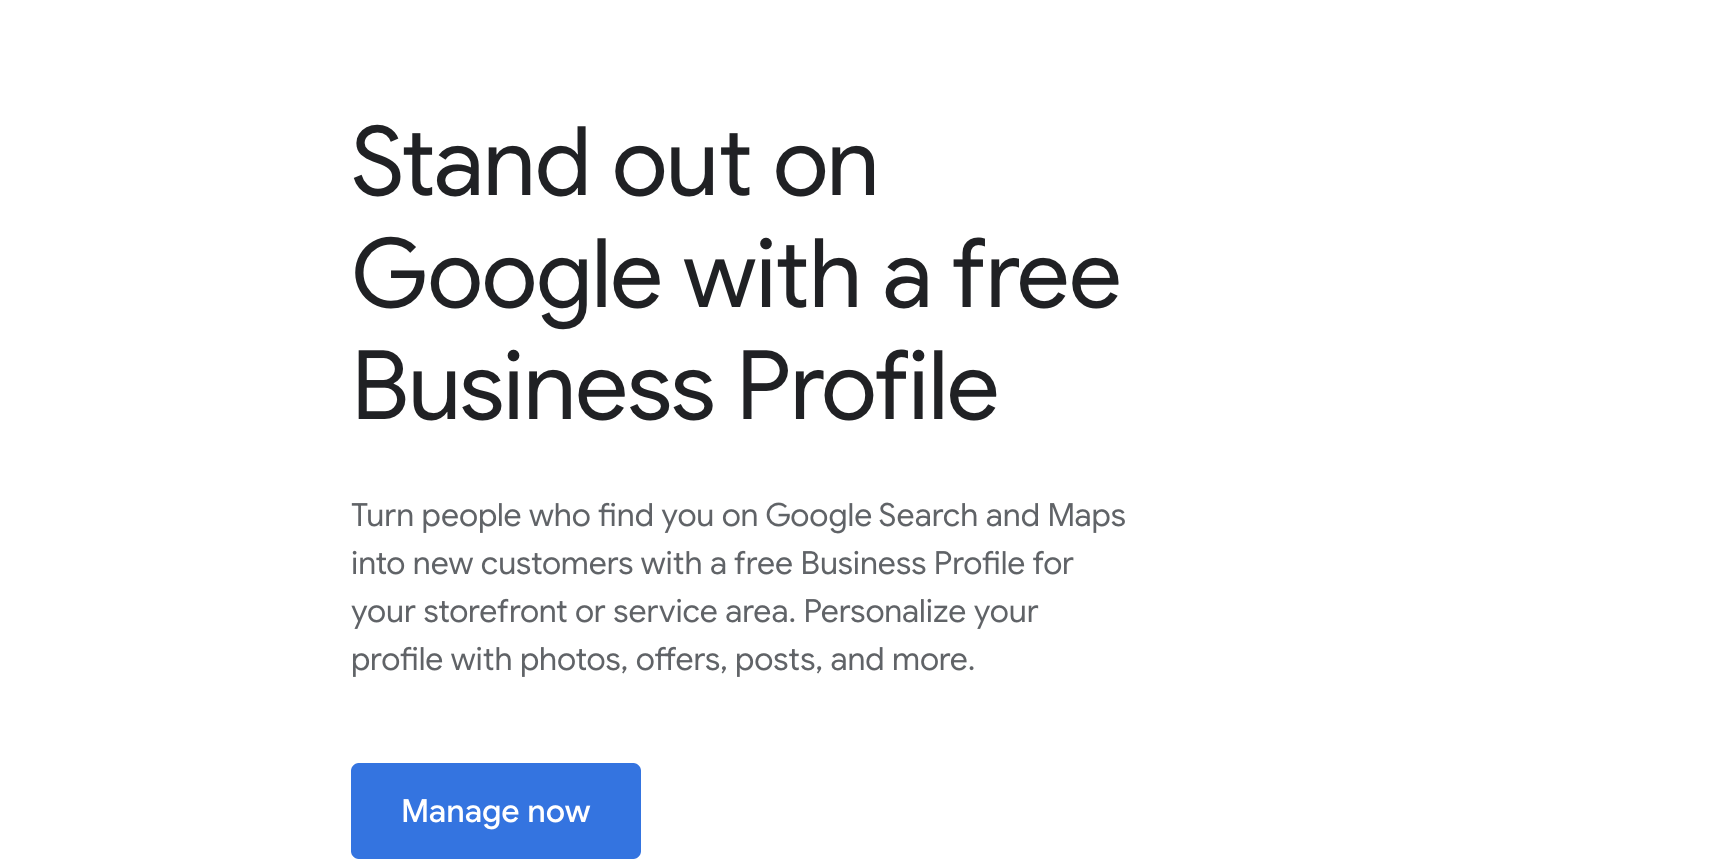 Google Business Profile is an essential part of any local SEO checklist